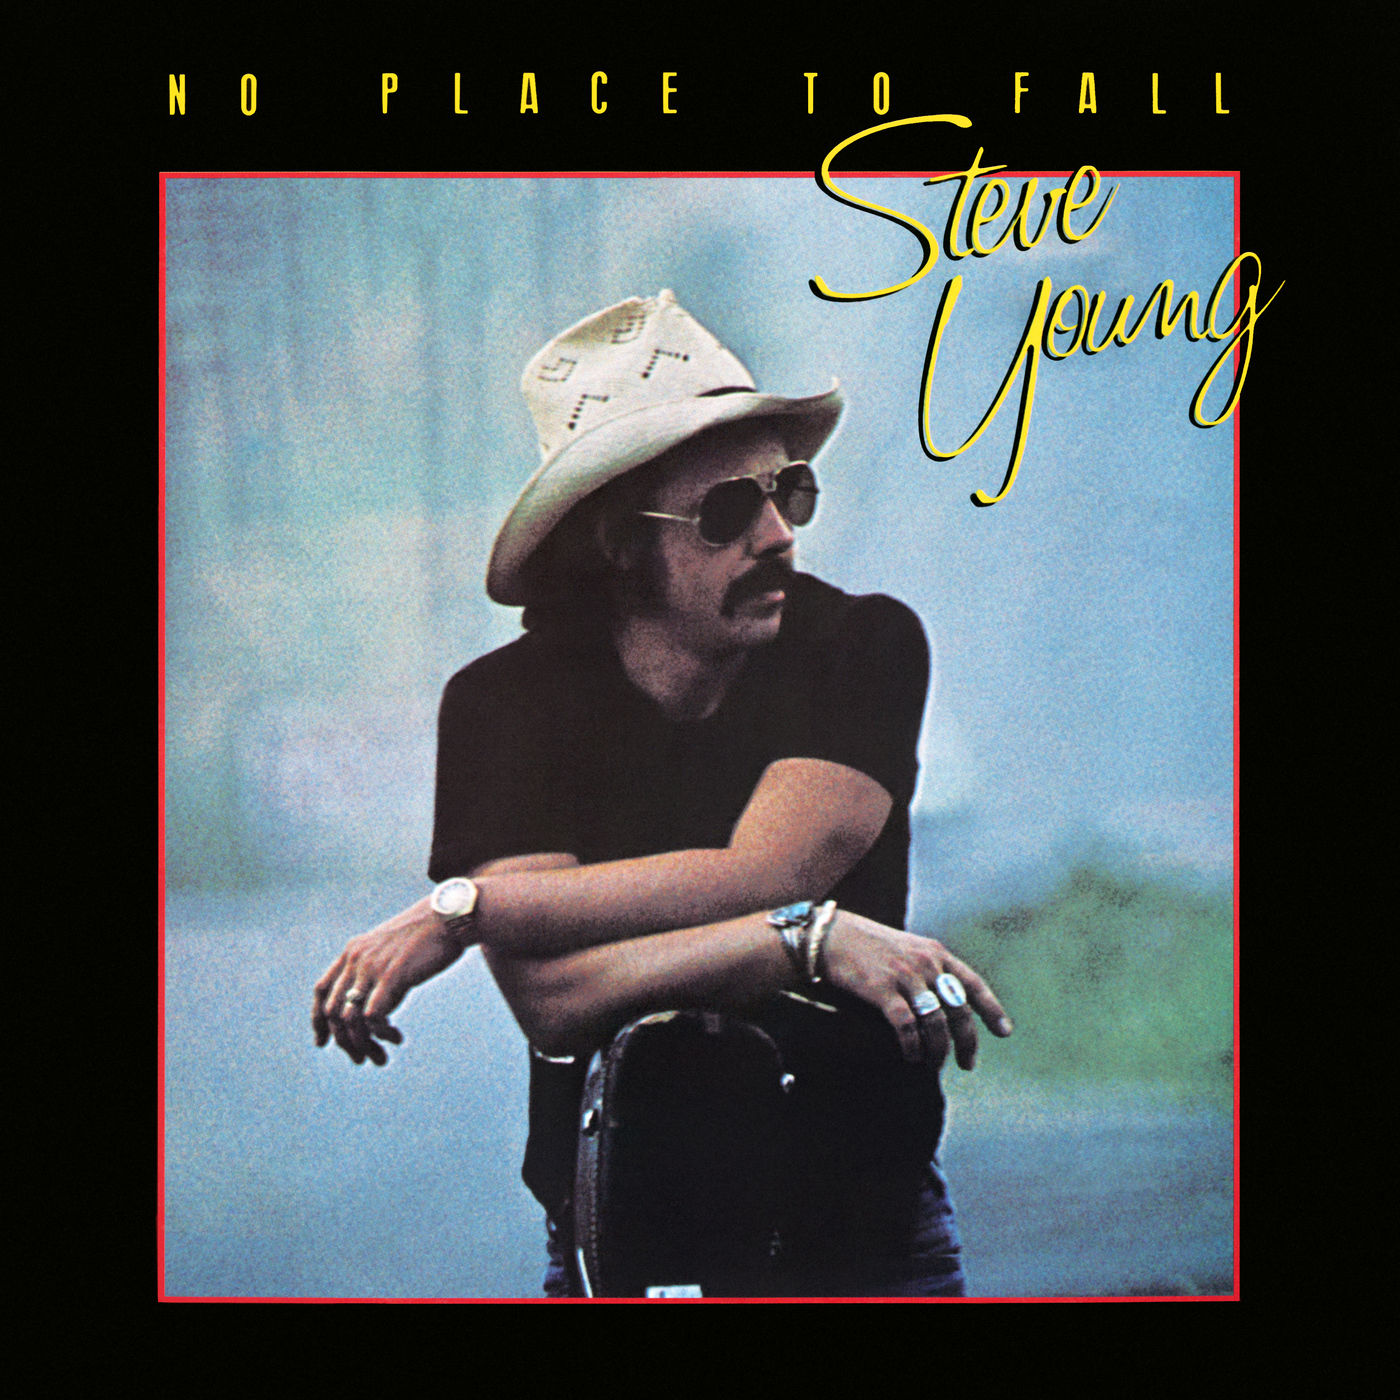 Steve Young – No Place to Fall